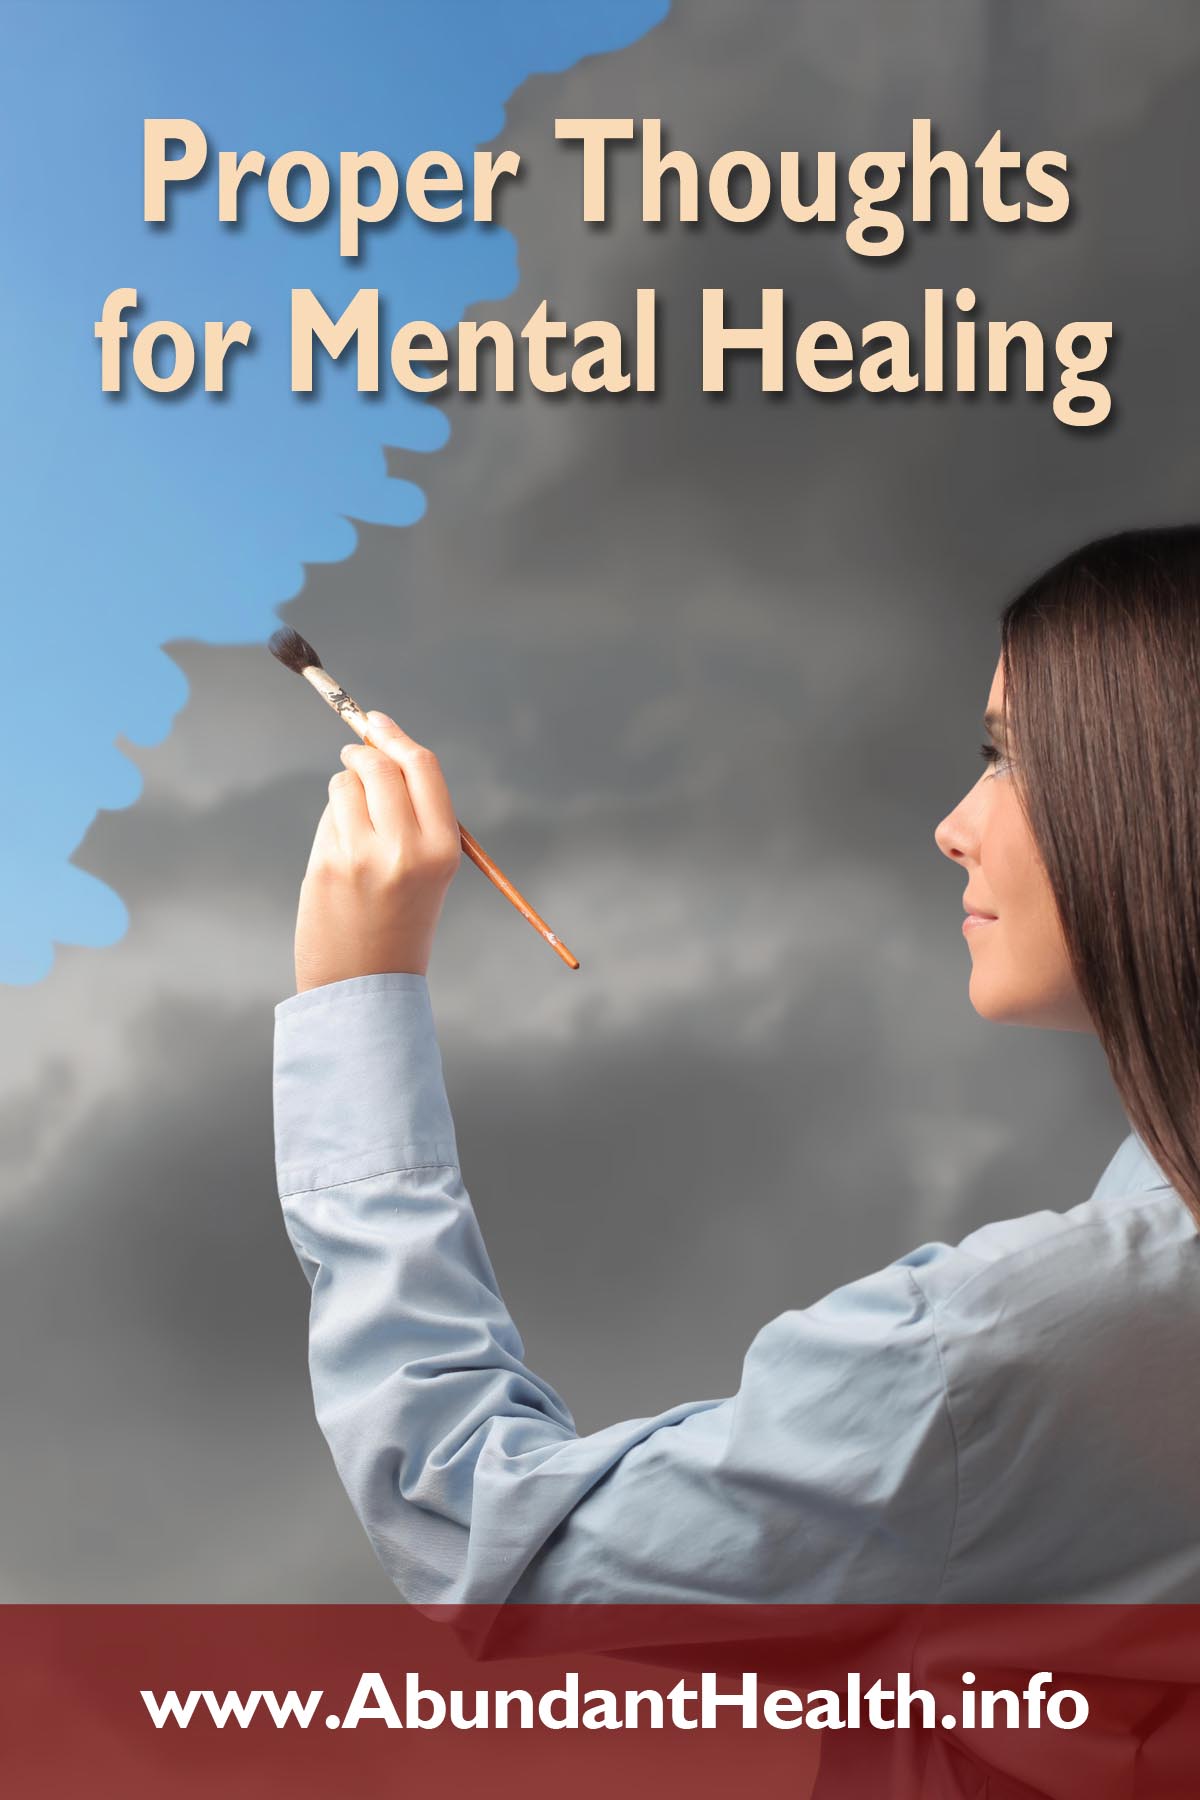 Proper Thoughts for Mental Healing